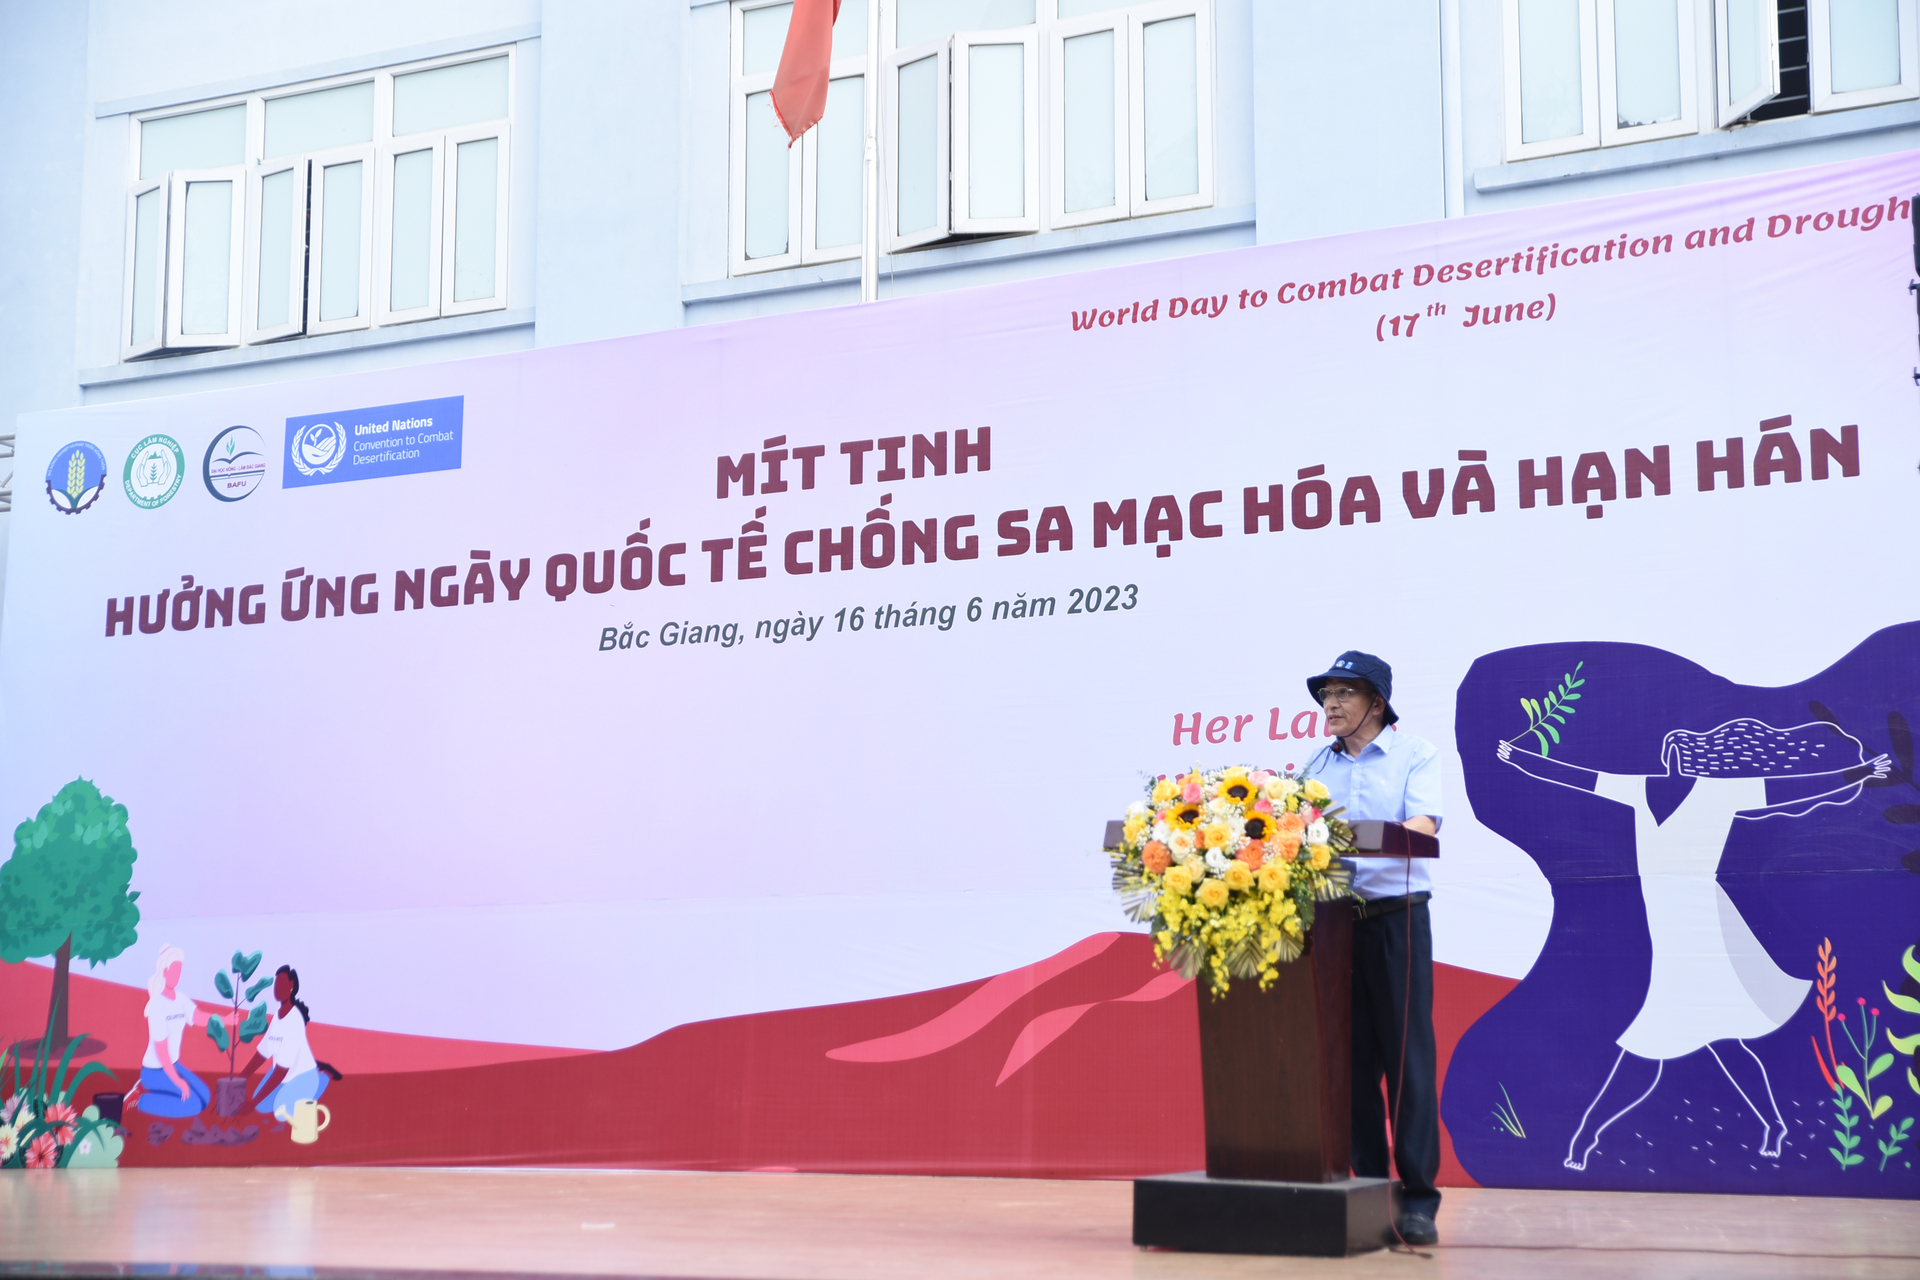 Assoc. Dr Nguyen Quang Ha, Rector of Bac Giang Agriculture and Forestry University, expressed his honour and pride when the school was selected as the venue for the meeting to respond to the International Day Against Desertification and Drought in 2023. Photo: Pham Hieu.